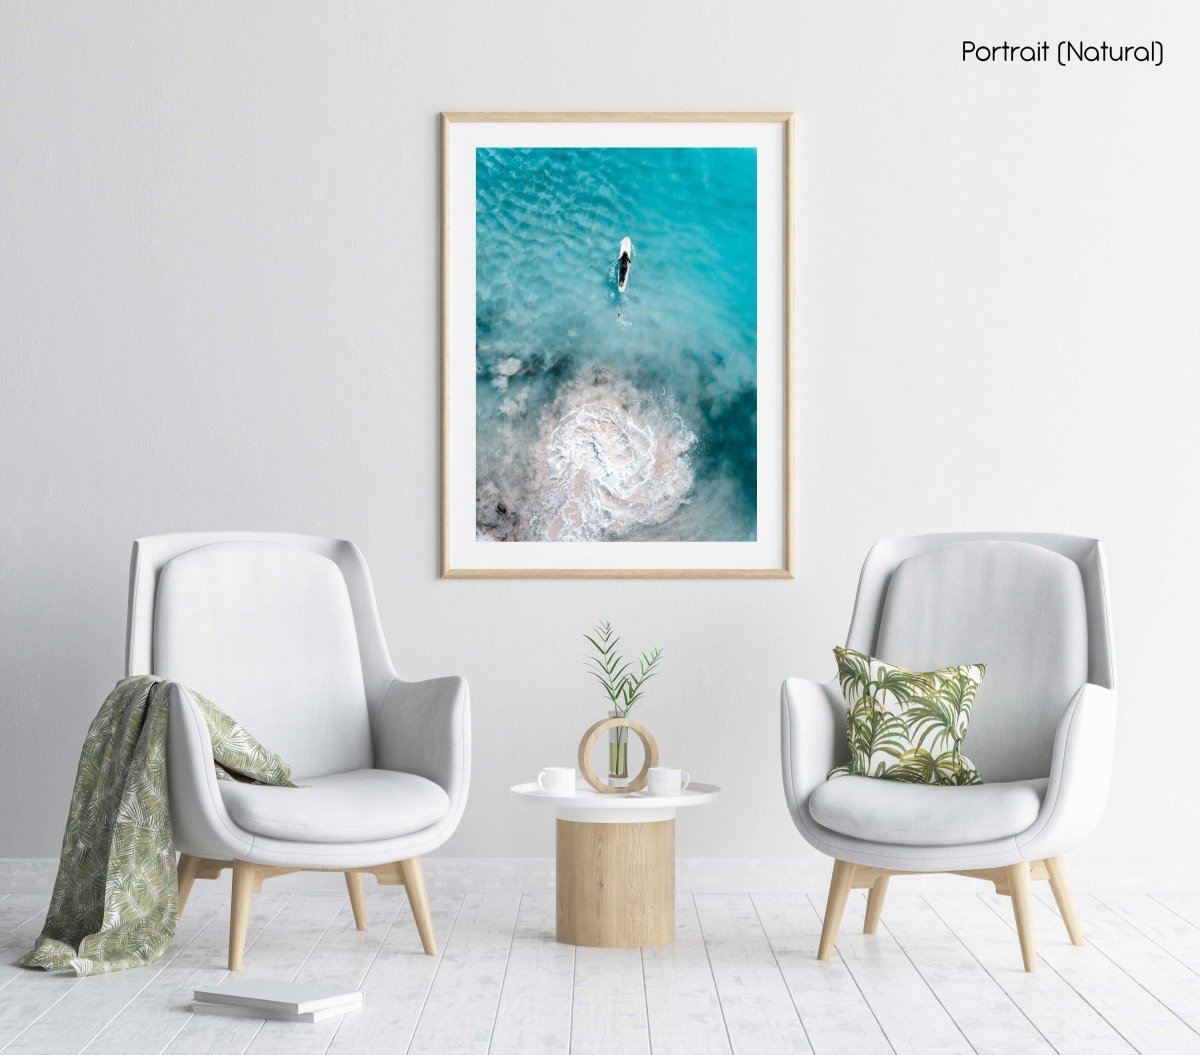 Aerial topdown of girl surfer in wetsuit paddling in blue water in a natural fine art frame